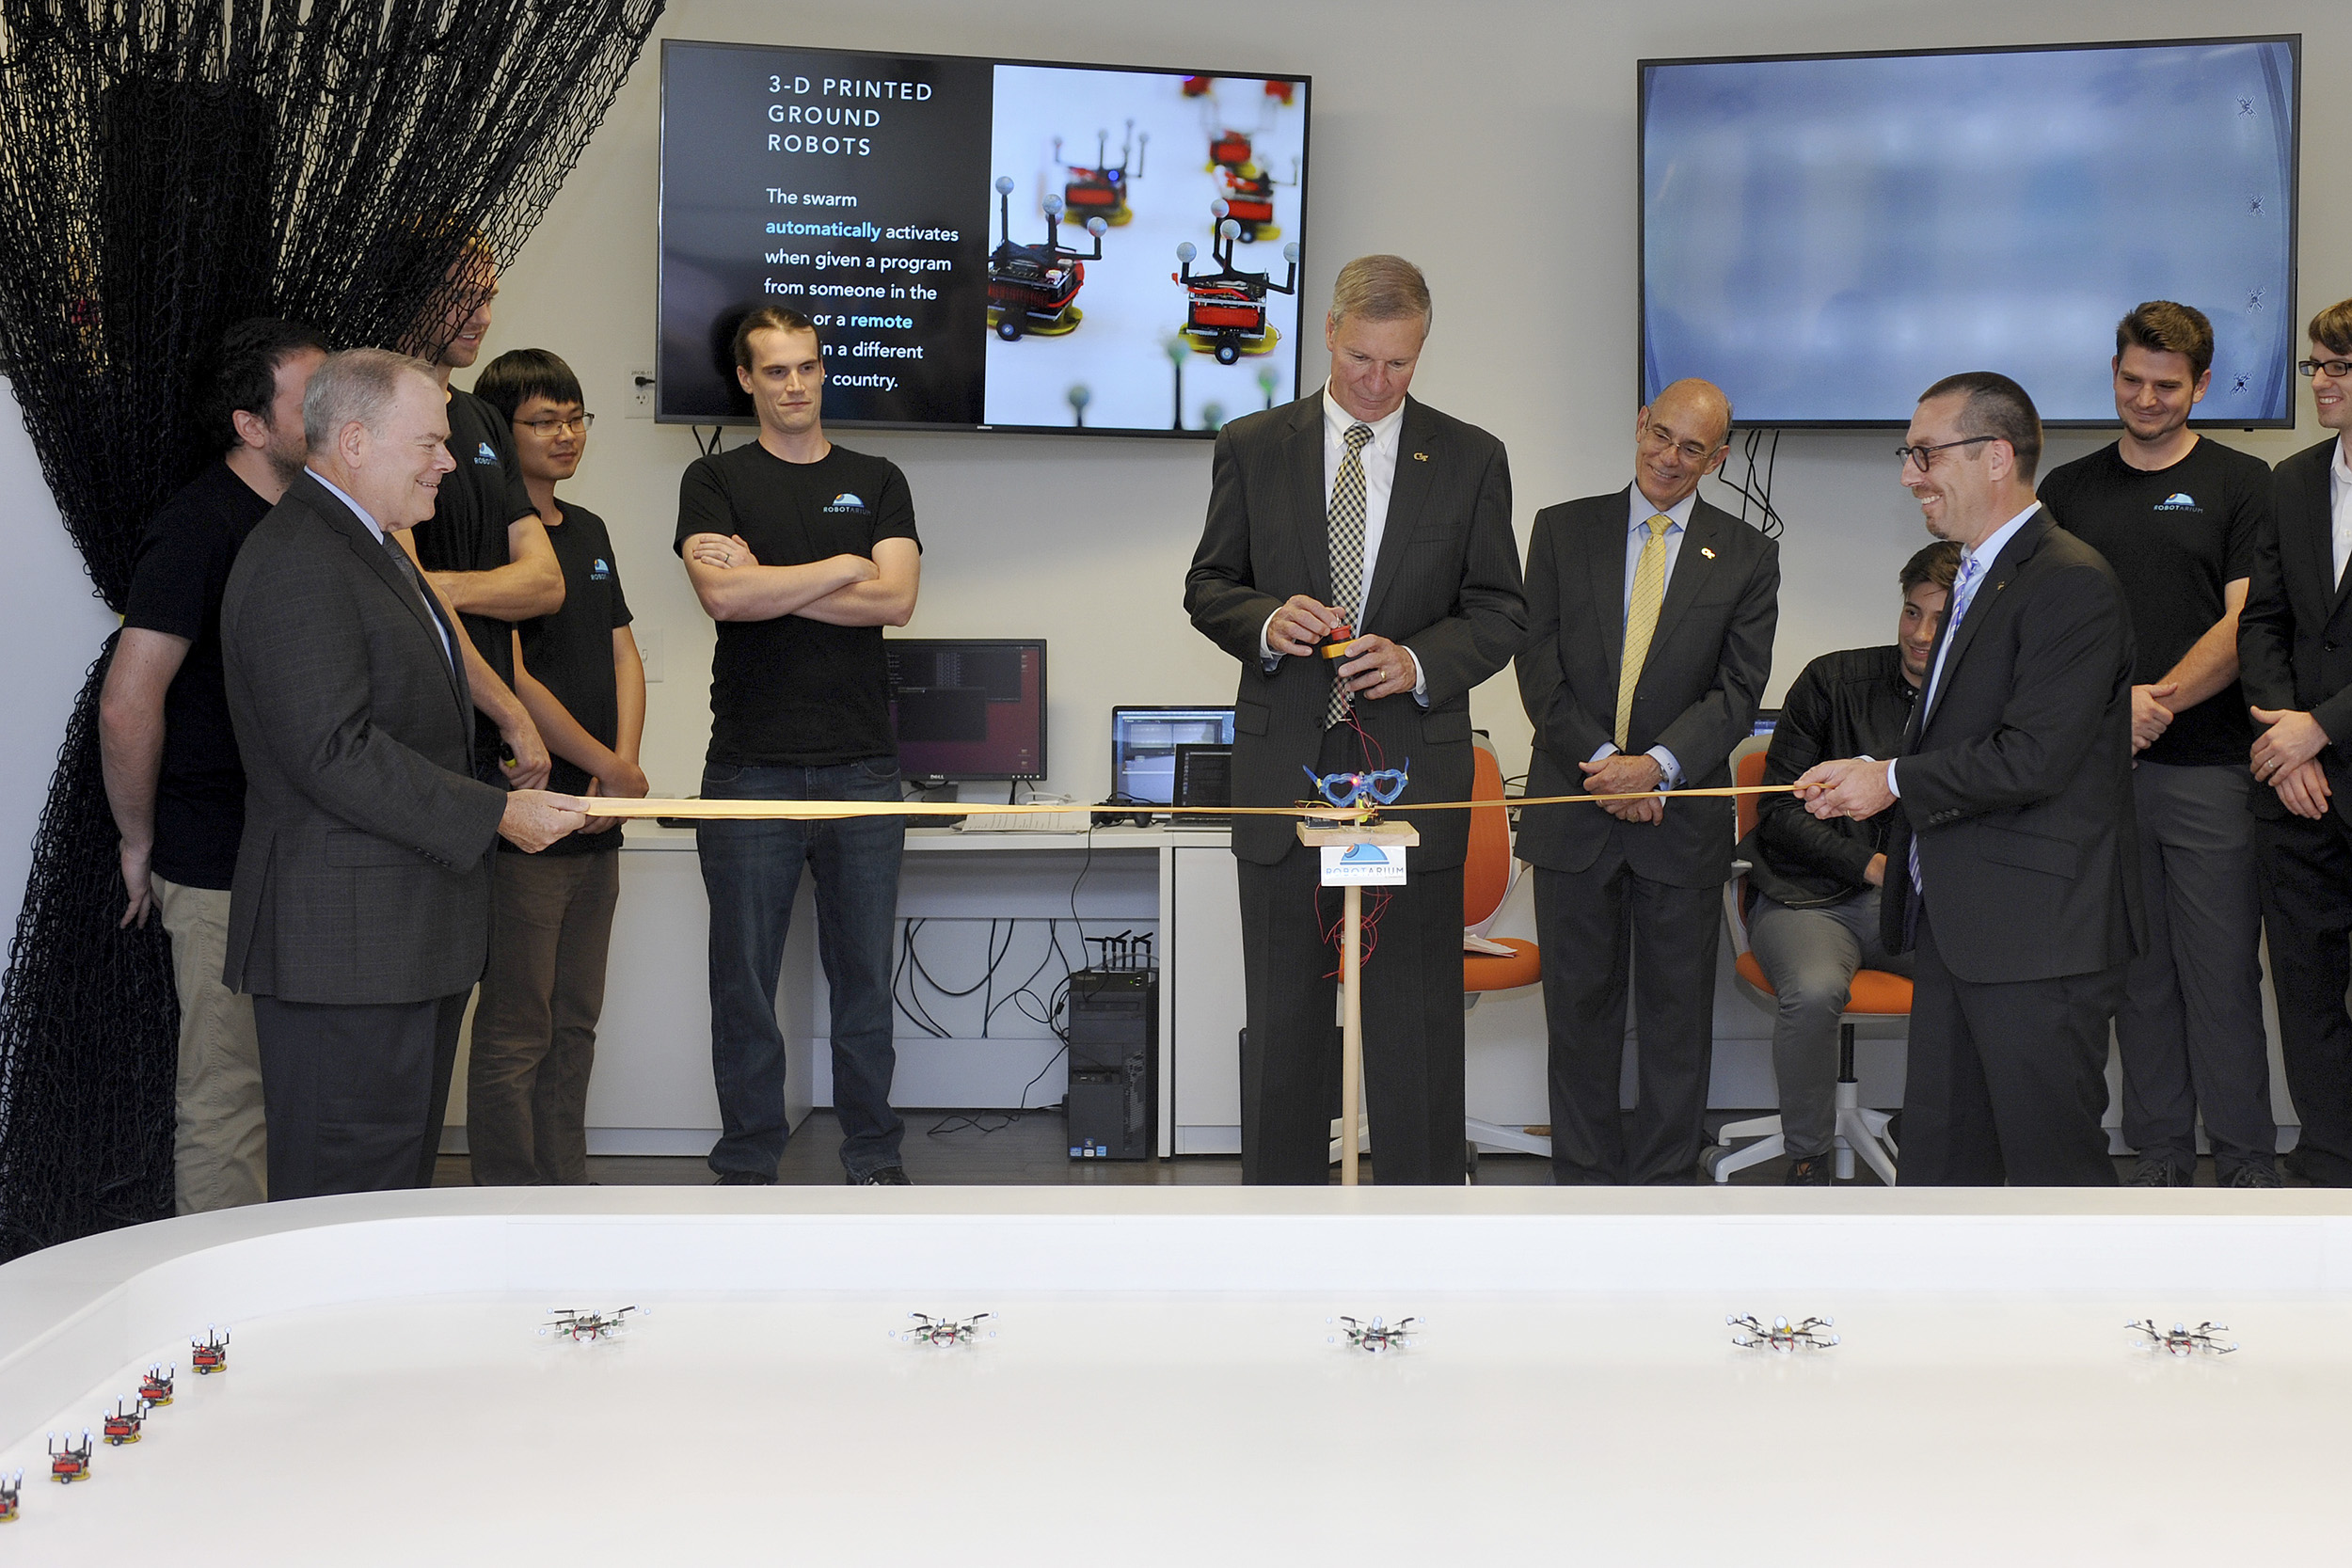 Snips the robot, controlled by President G.P. "Bud" Peterson, cuts the ribbon to open the Robotarium.